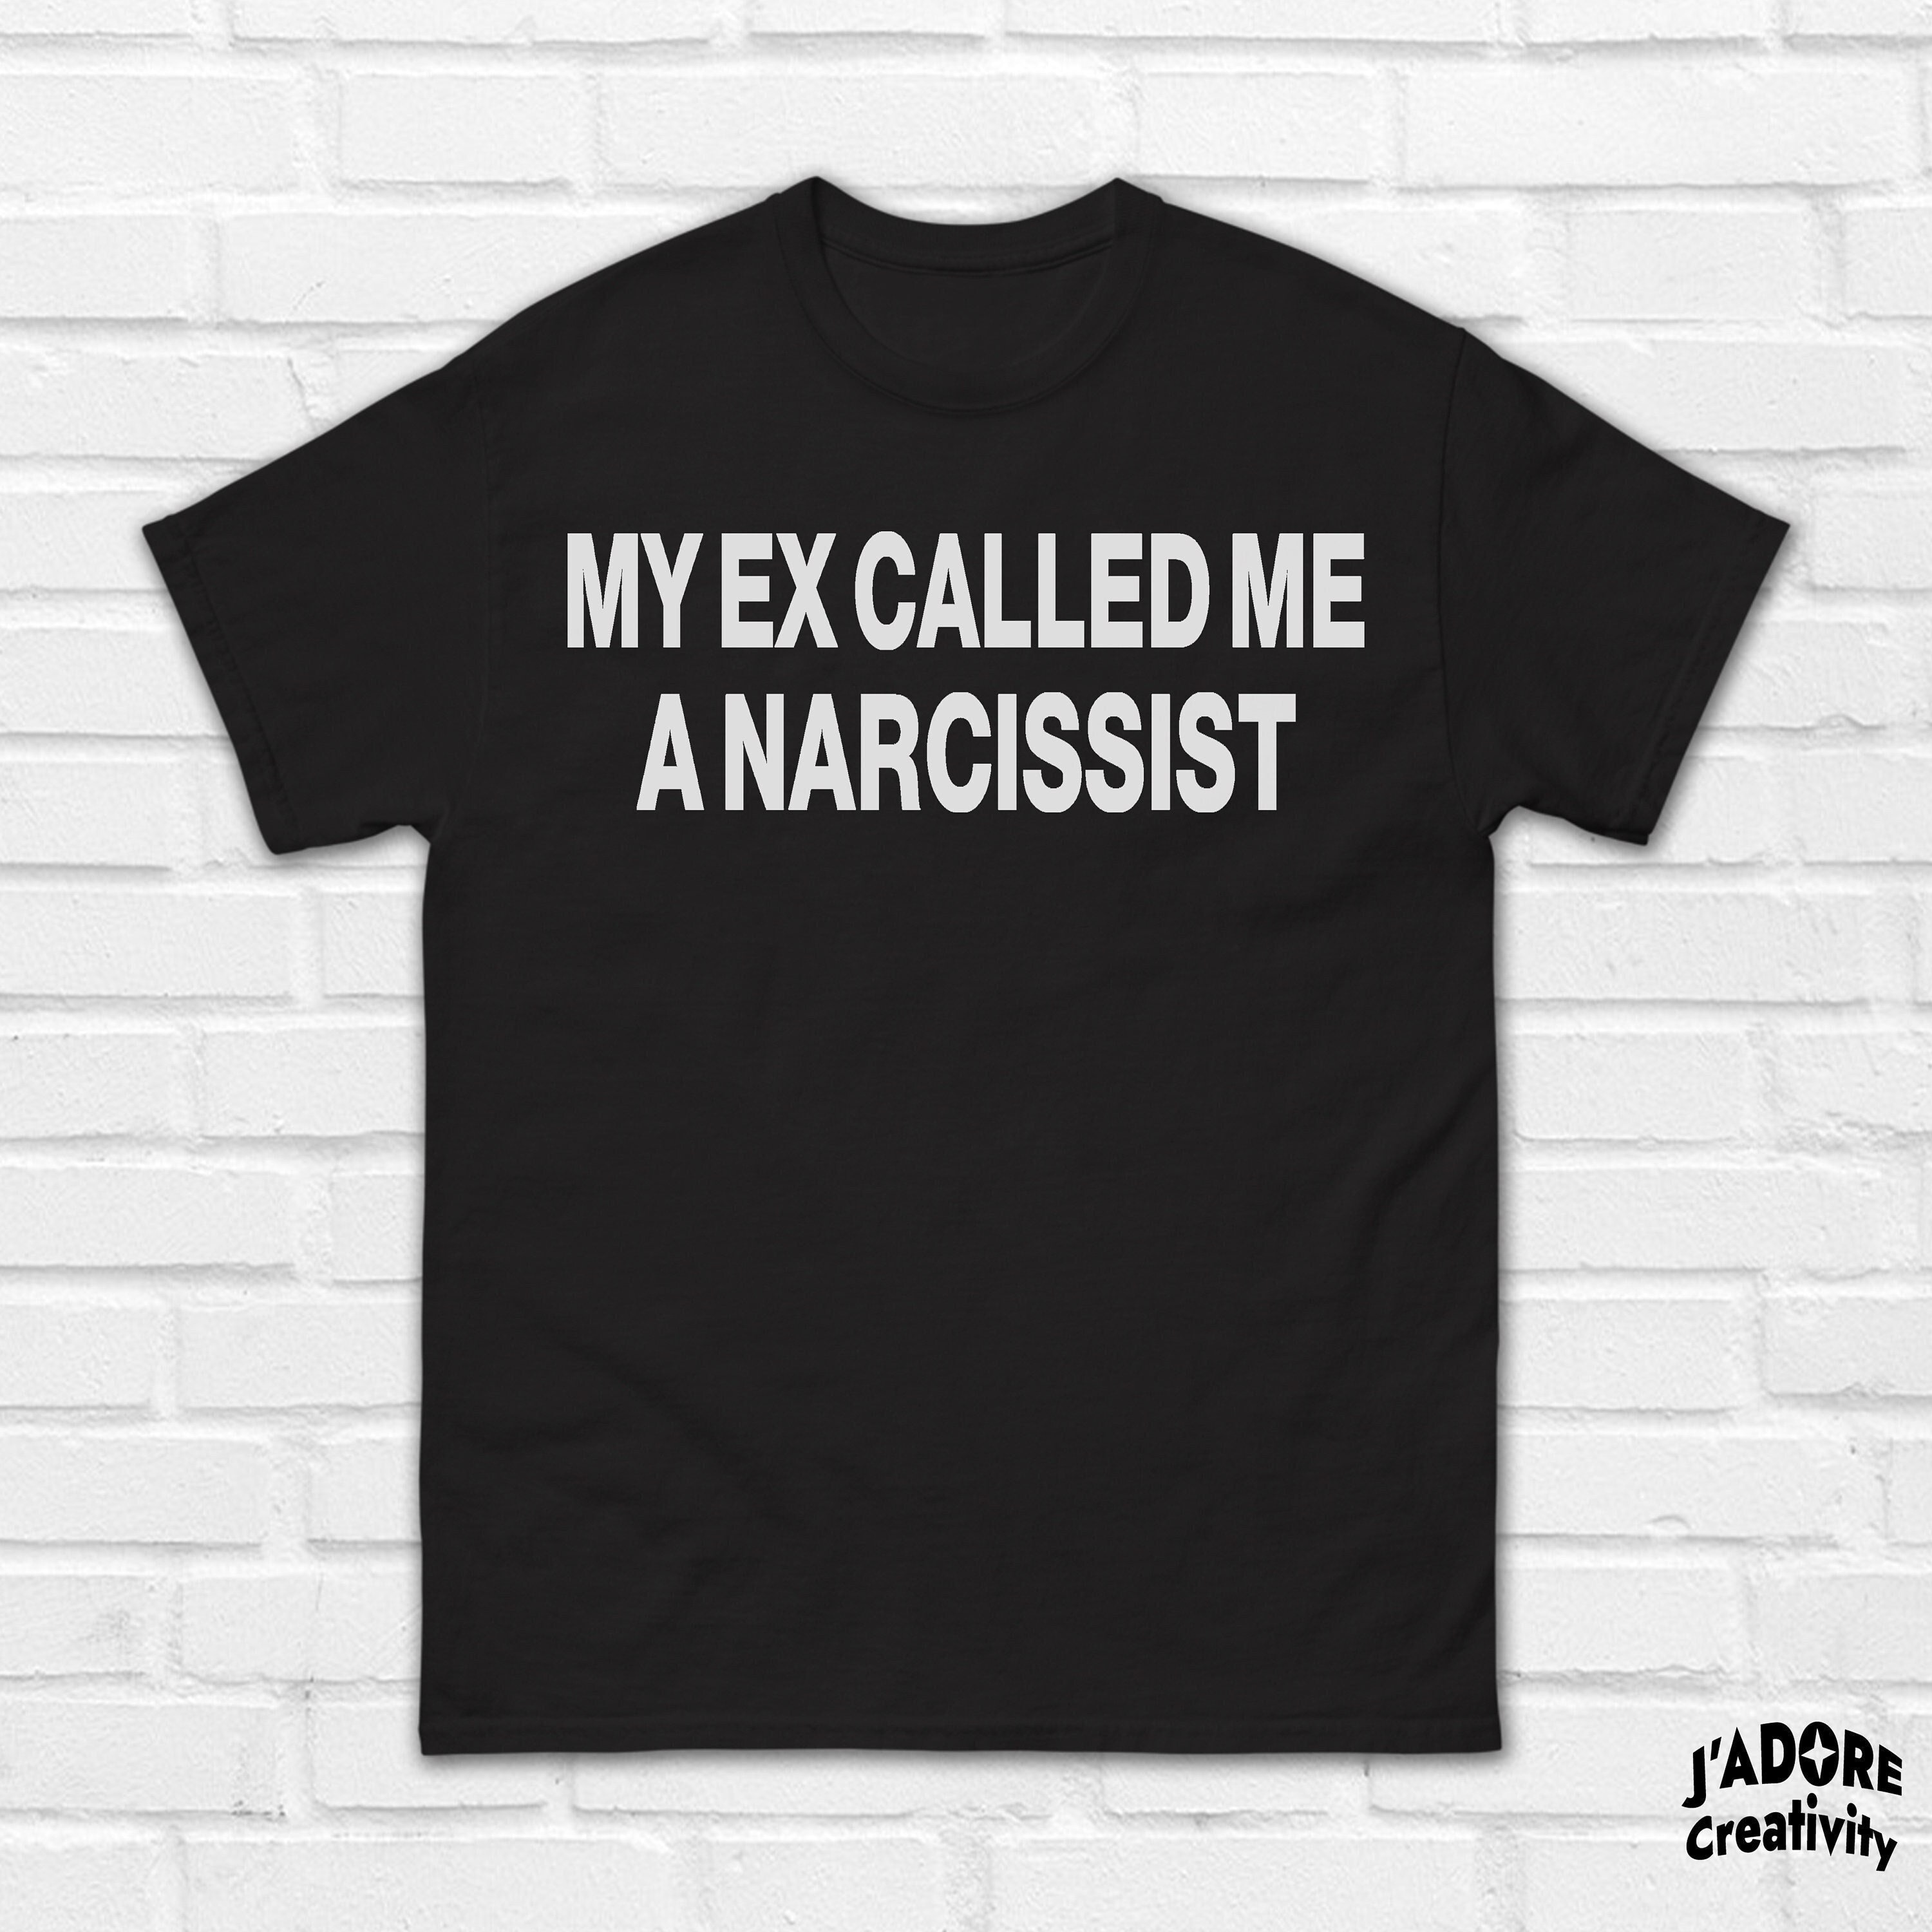 My Ex Called Me A Narcissist Sarcastic T Shirt Humorous image picture